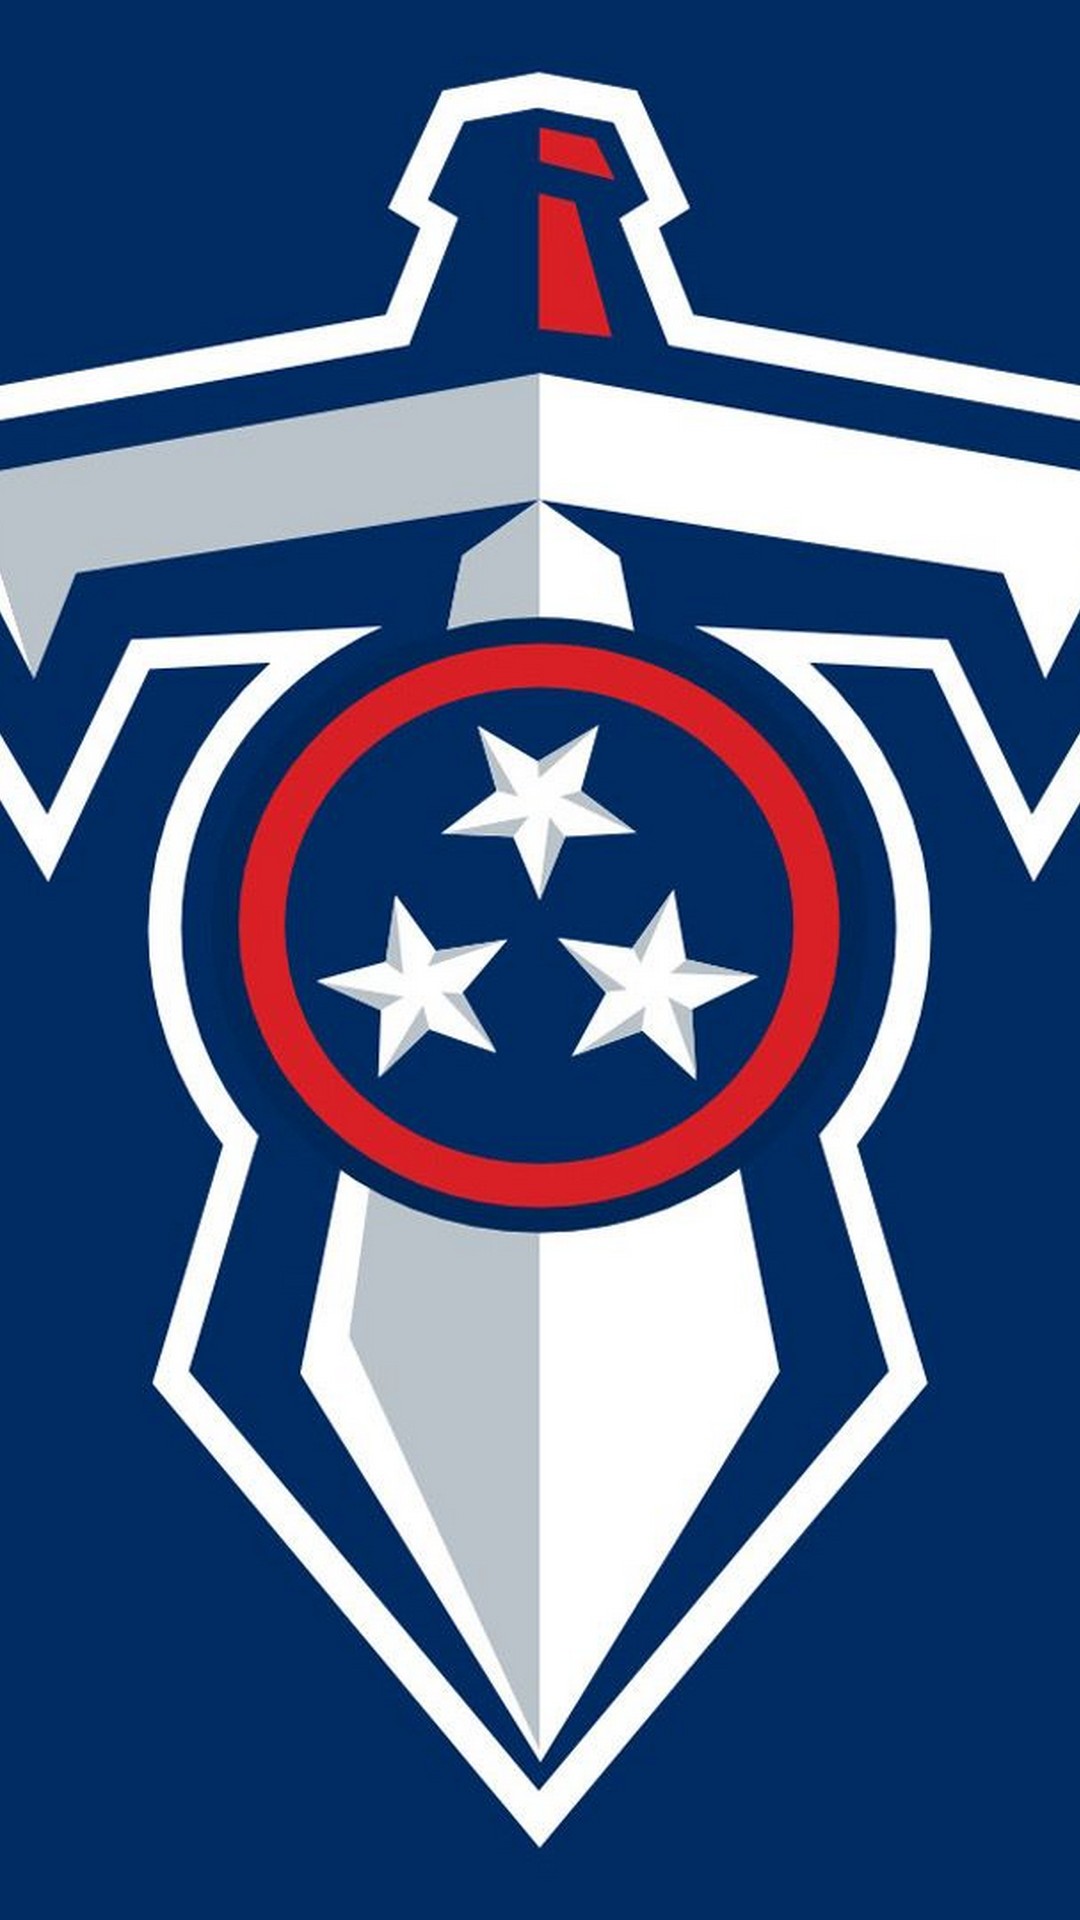 iPhone Wallpaper HD Tennessee Titans With high-resolution 1080X1920 pixel. You can use this wallpaper for your Mac or Windows Desktop Background, iPhone, Android or Tablet and another Smartphone device